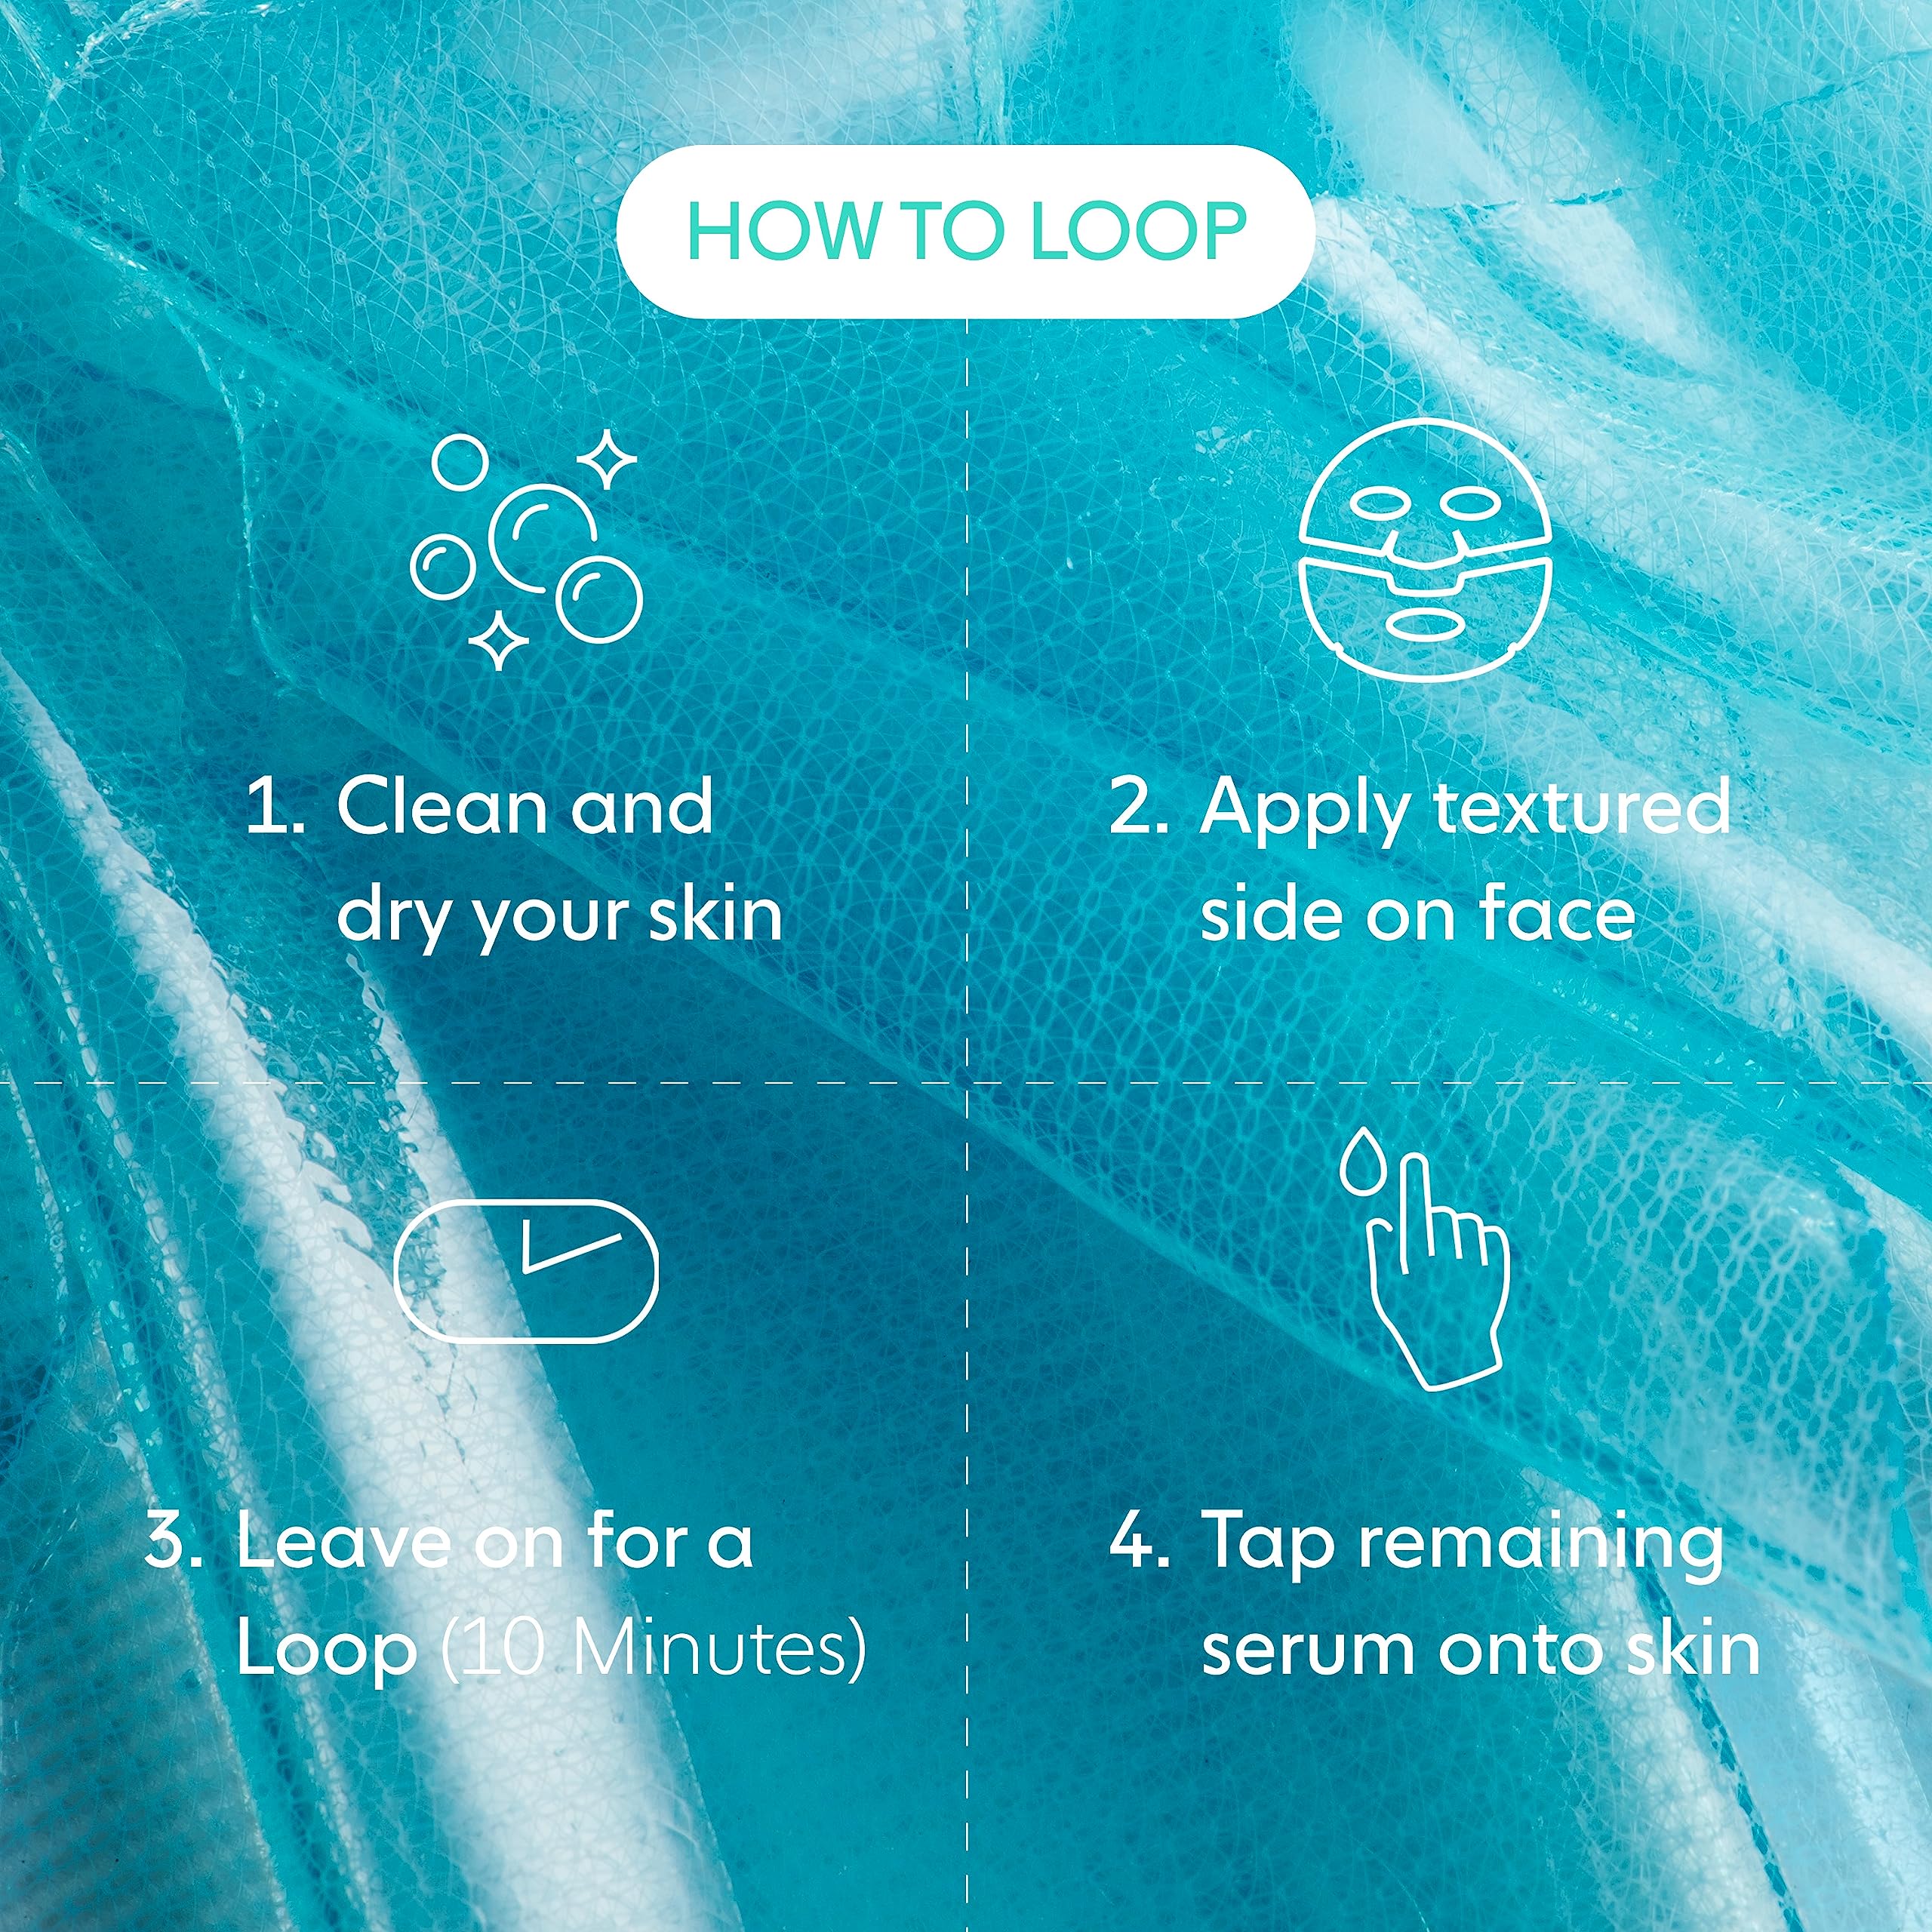 LOOPS VARIETY LOOP KIT - The Best Hydrogel Face Masks for Every Skin Moment - Comes With Five Masks for Brightening, Detoxifying, Repairing, Glowing, and Rejuvenating - For All Skin Types - 5 Pc